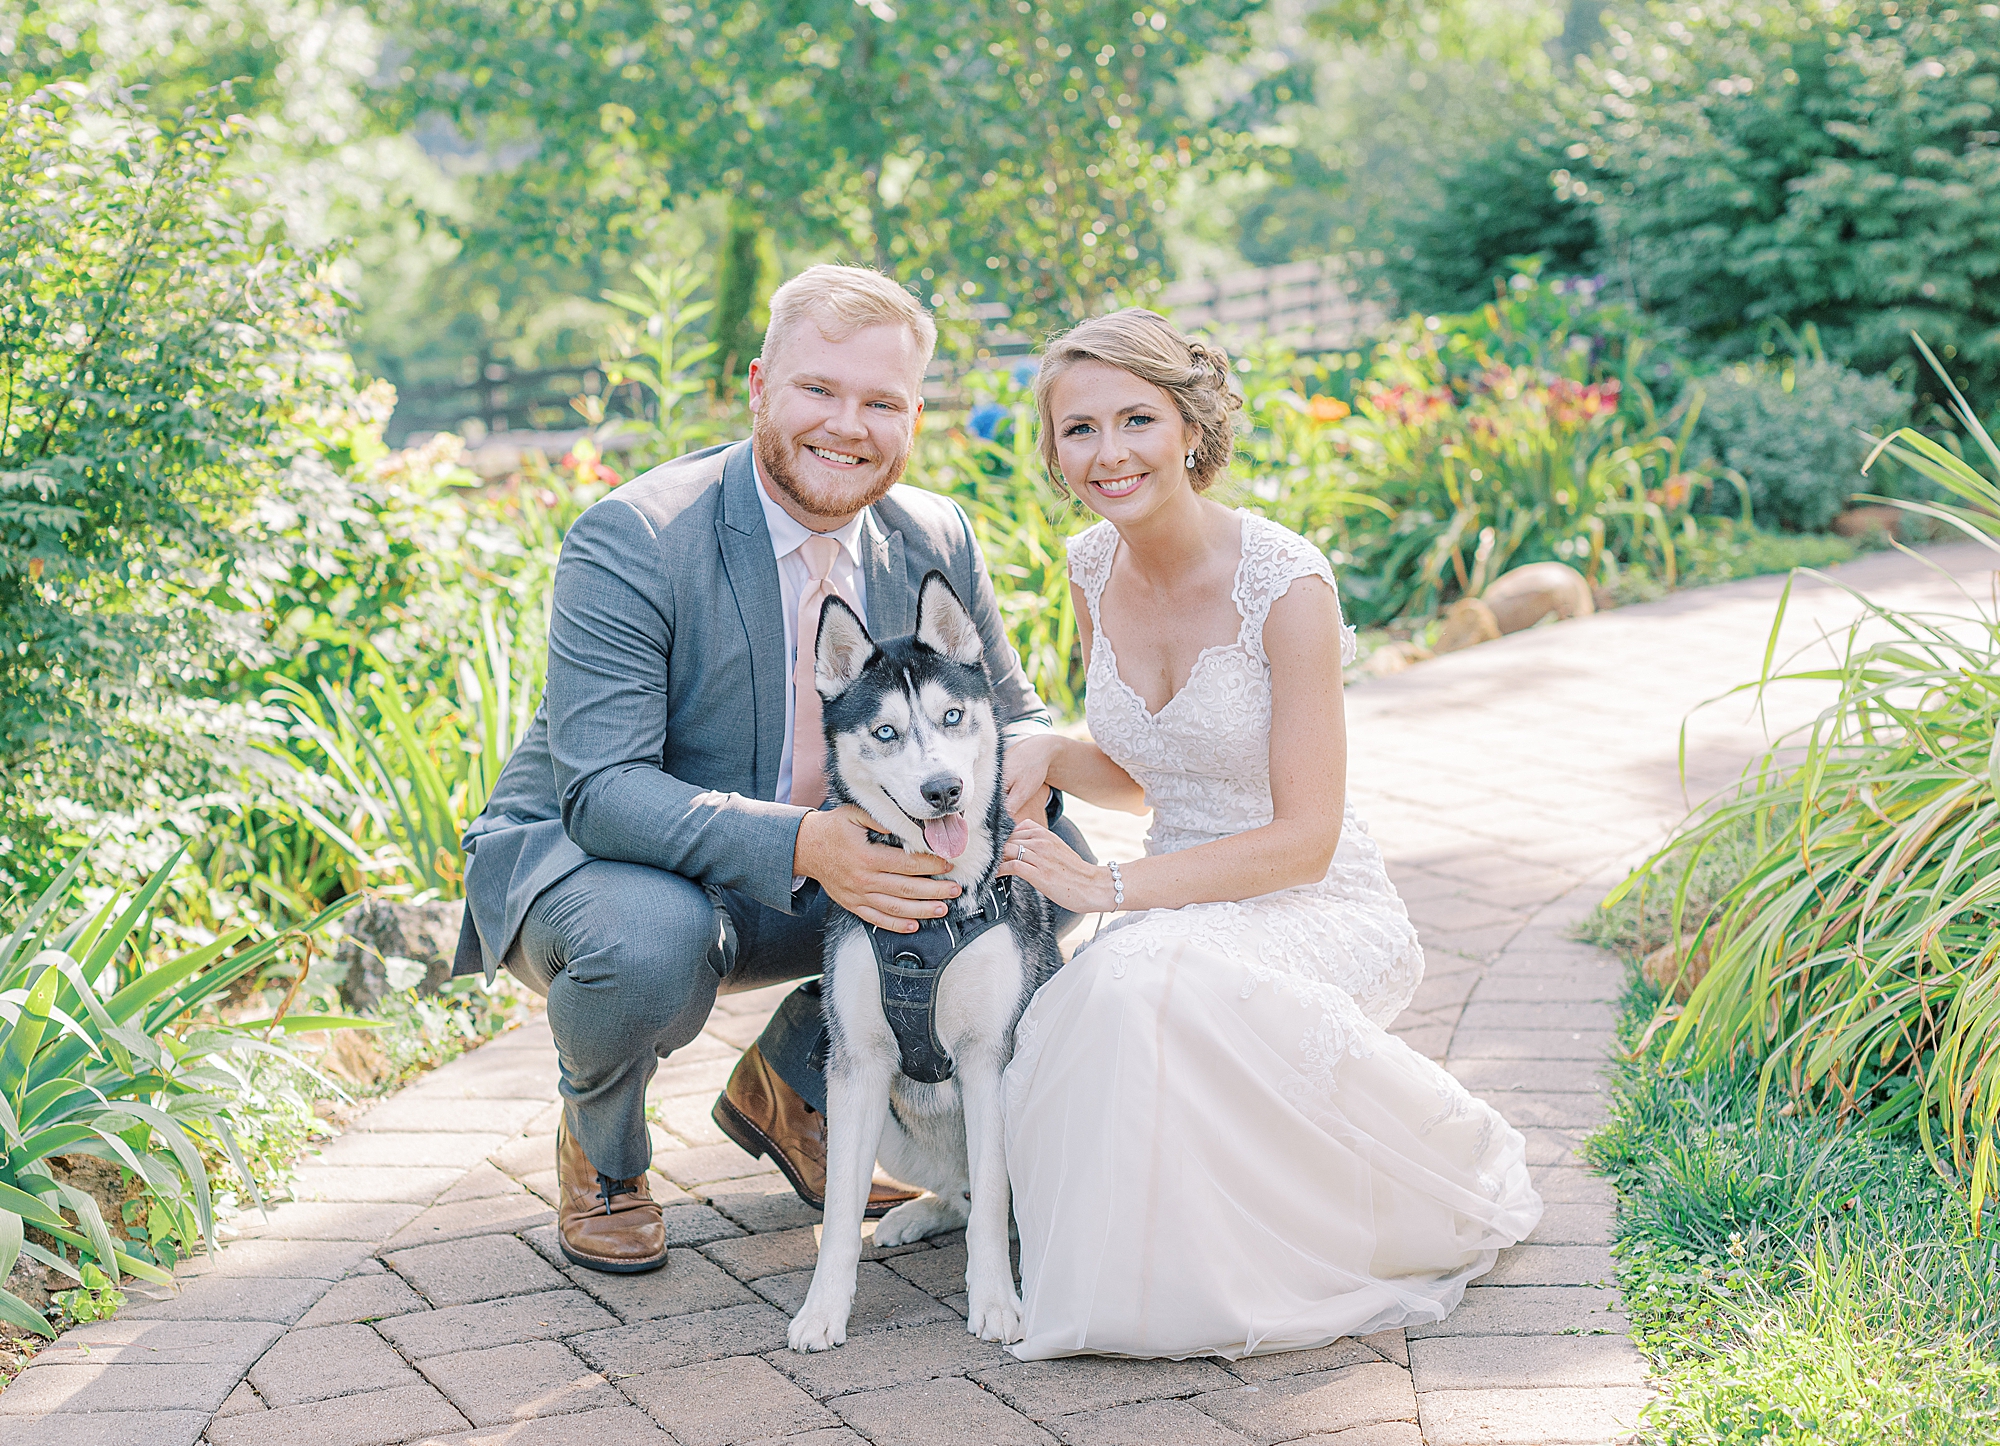 Bride and groom photos with dog.